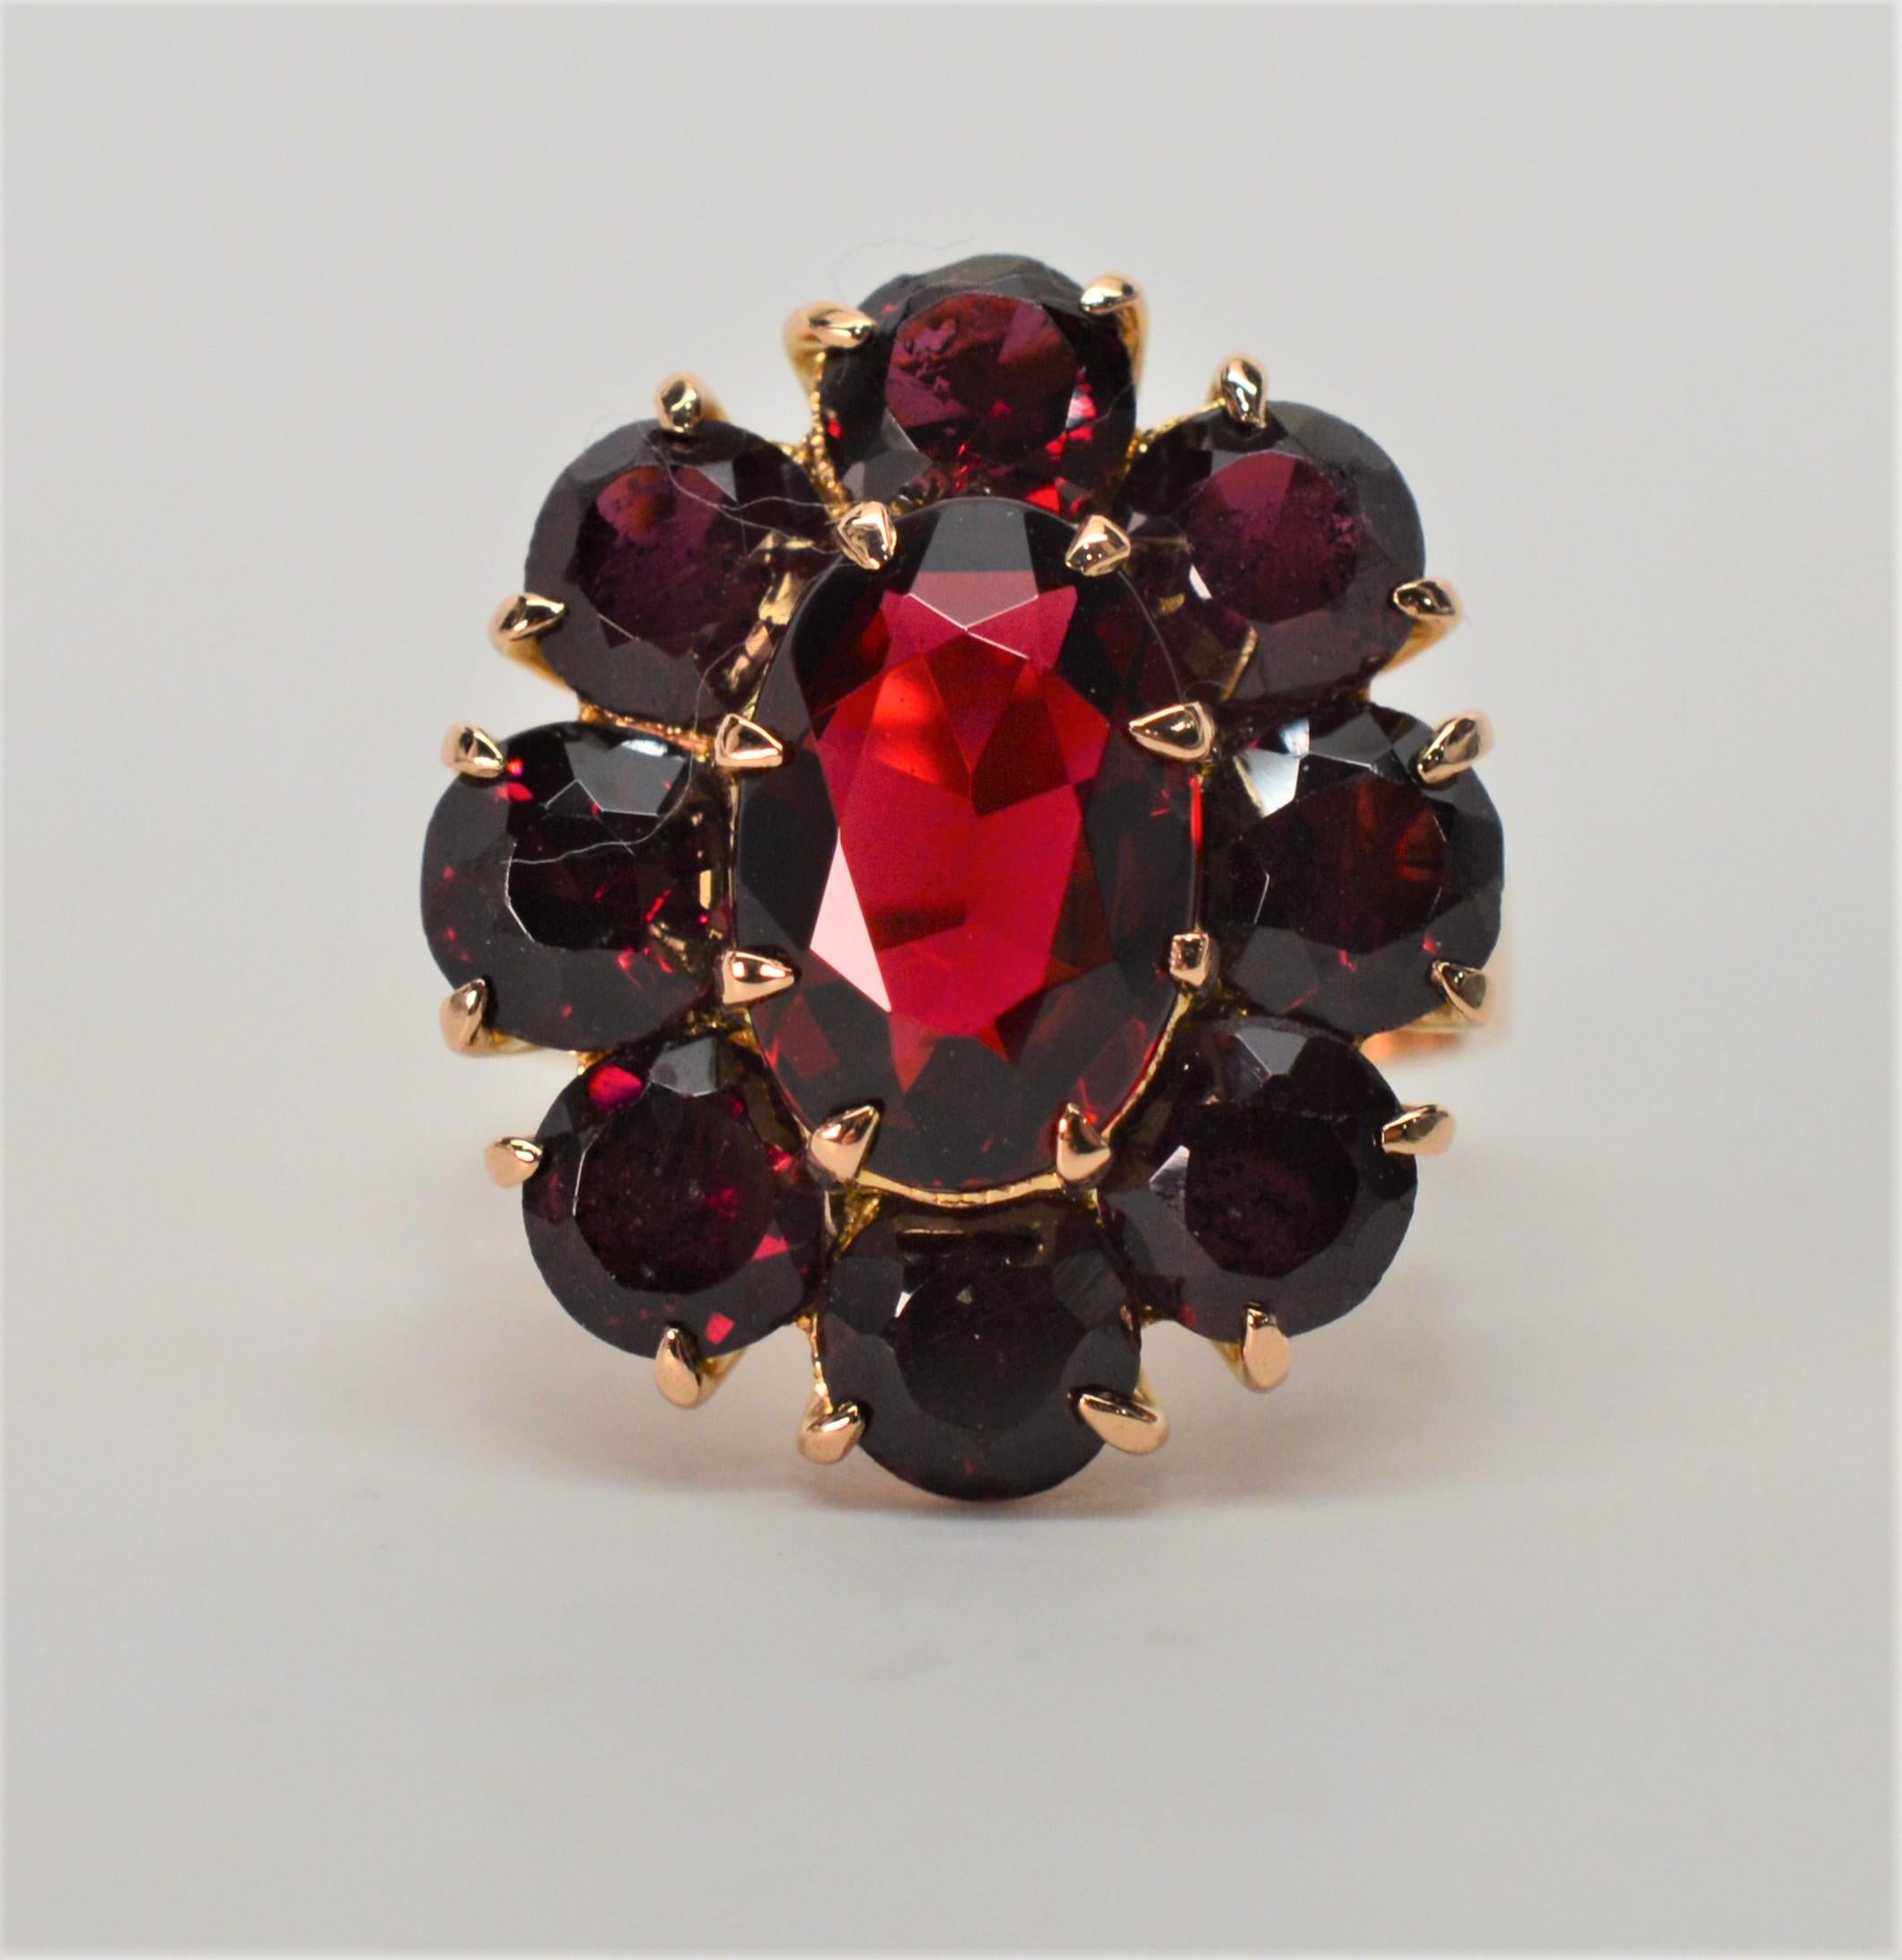 More than twelve carats of deep rich natural hand-cut garnet stones illuminate this spectacular antique cluster ring made of fourteen karat (14K) yellow gold. The oval ring head measuring approximately 23.25mm x 26.25mm has an oval faucet center